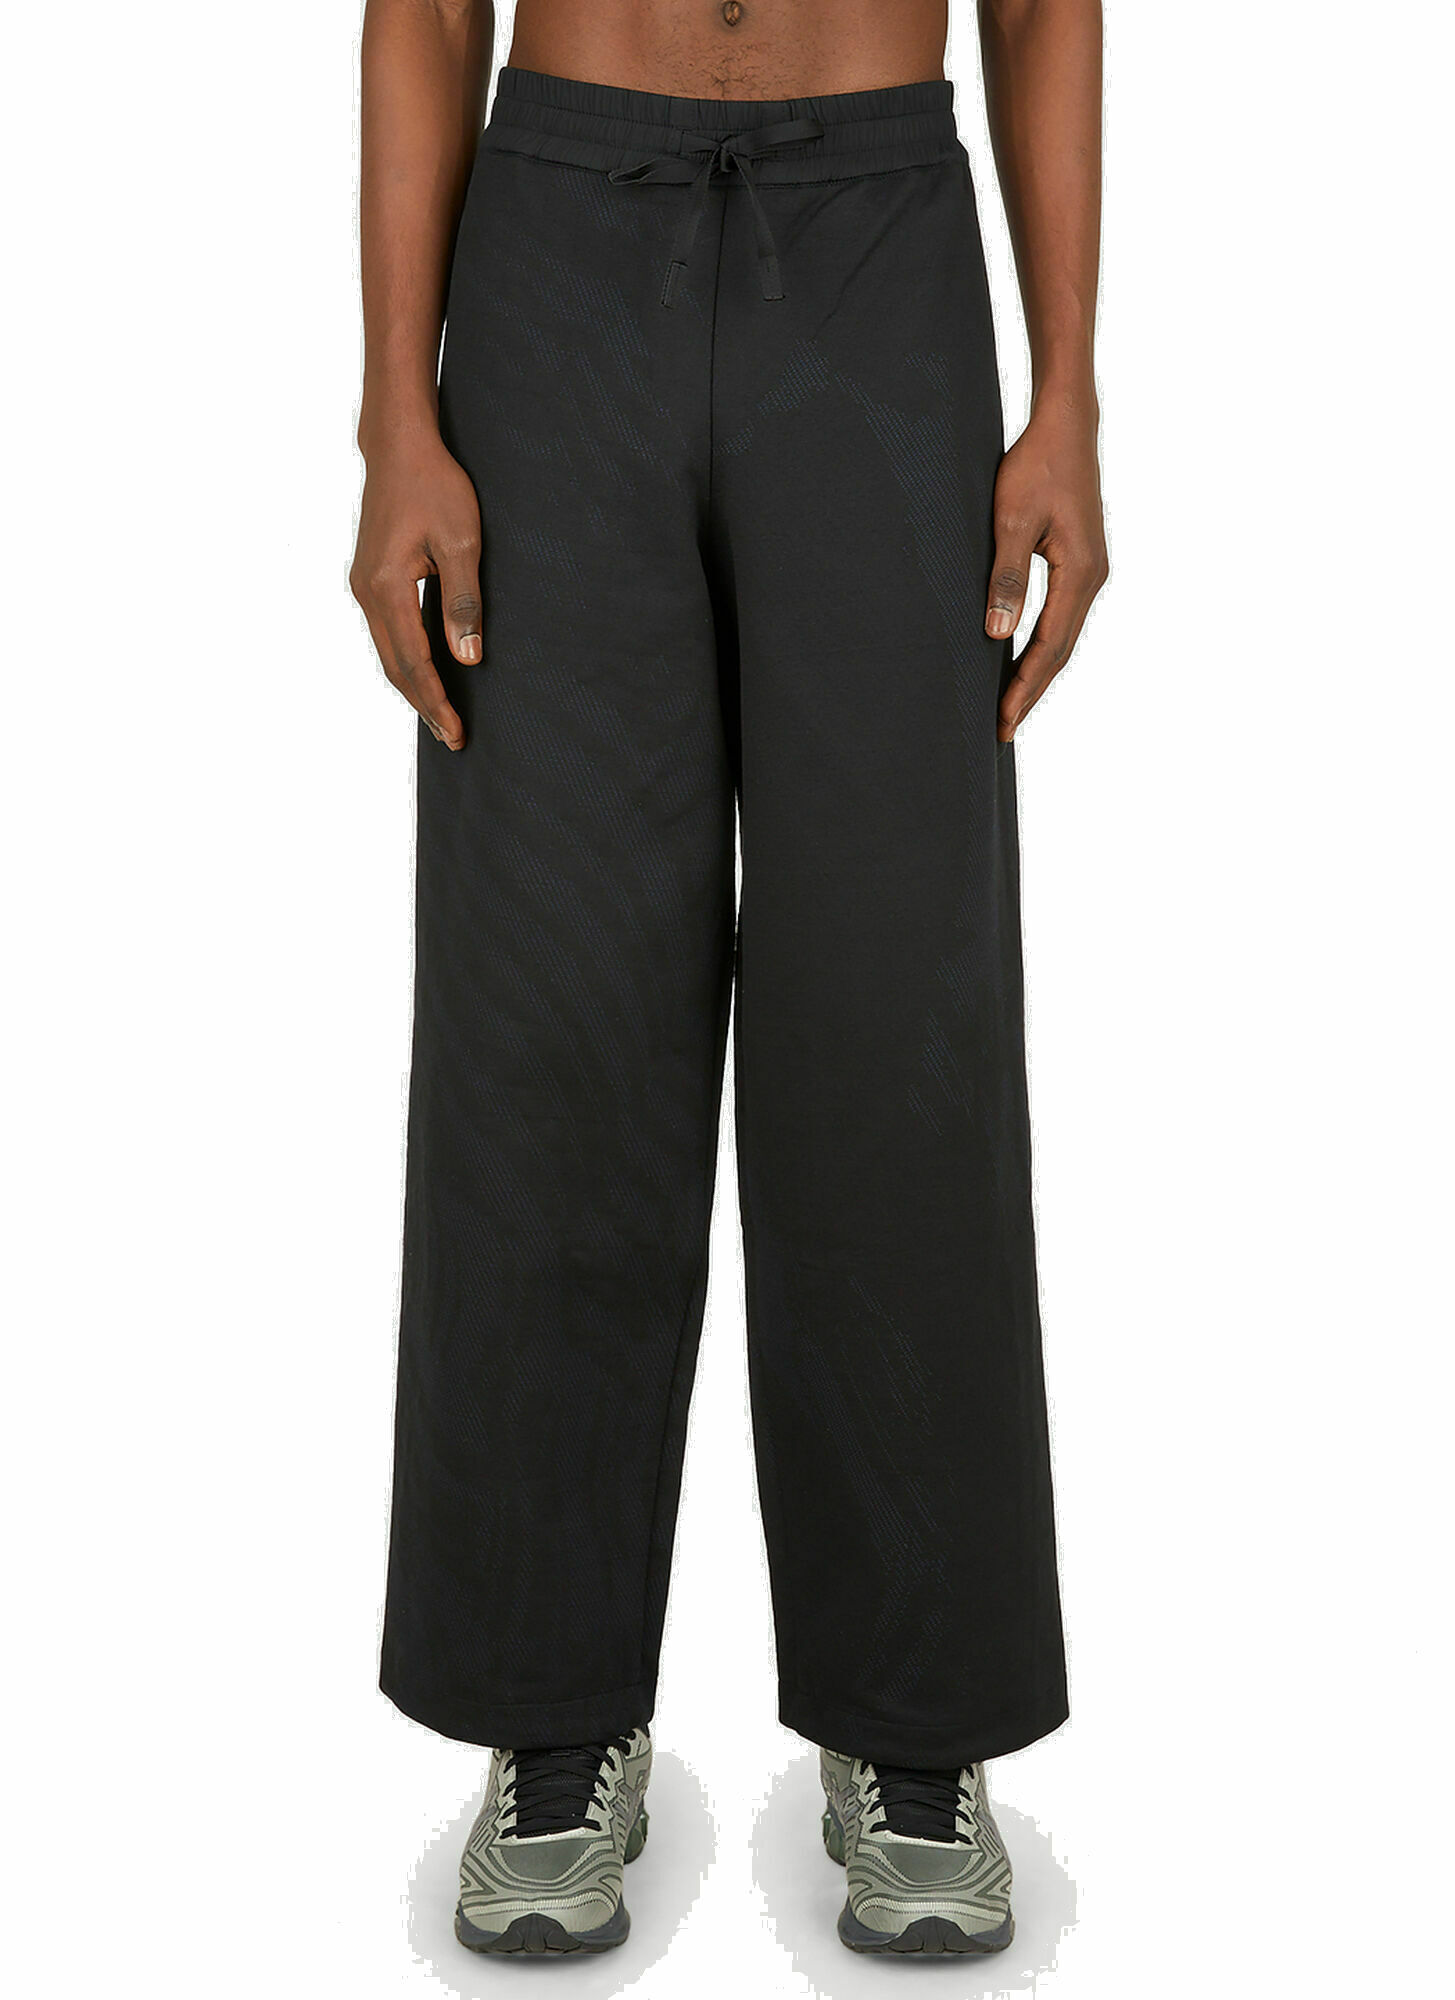 Bulky Track Pants in Navy BYBORRE